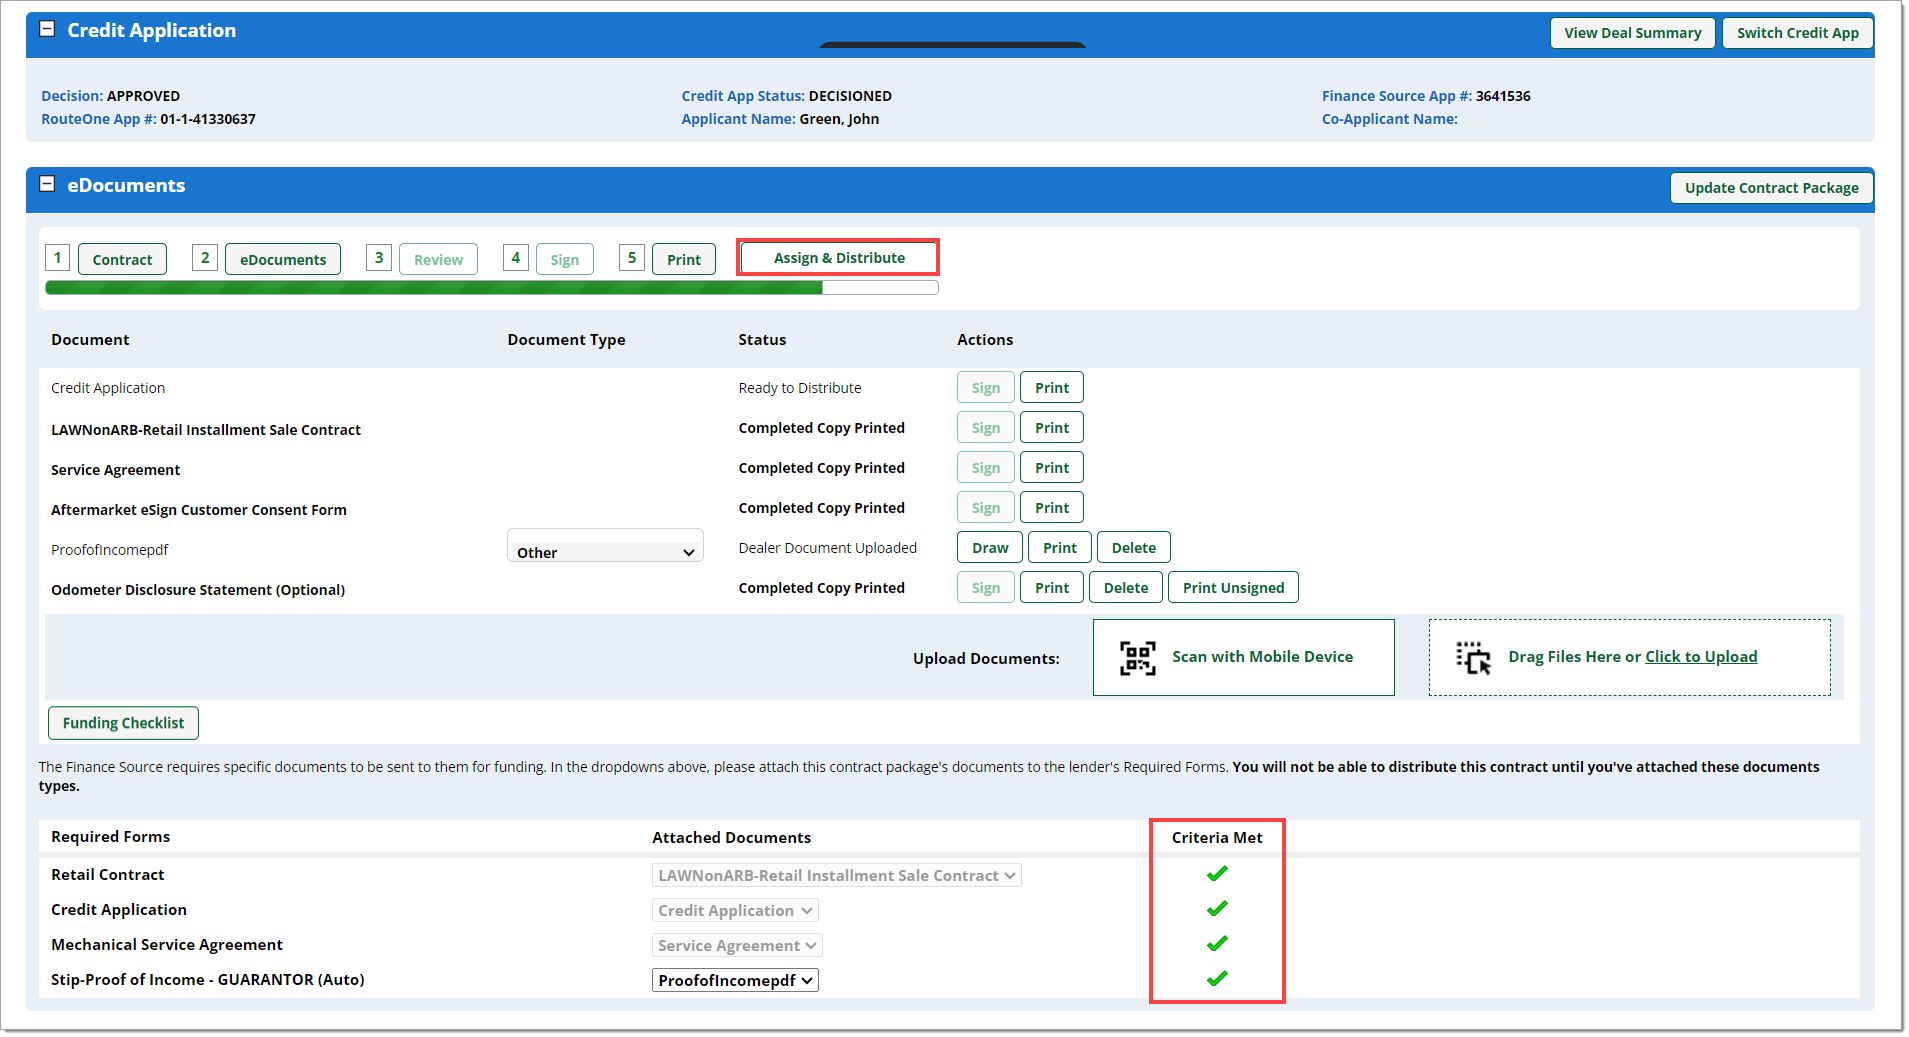 The Contract Package page with an arrow pointing to the available ‘Assign and Distribute’ button and a box highlighting the ‘Criteria Met’ column with check marks in every row.